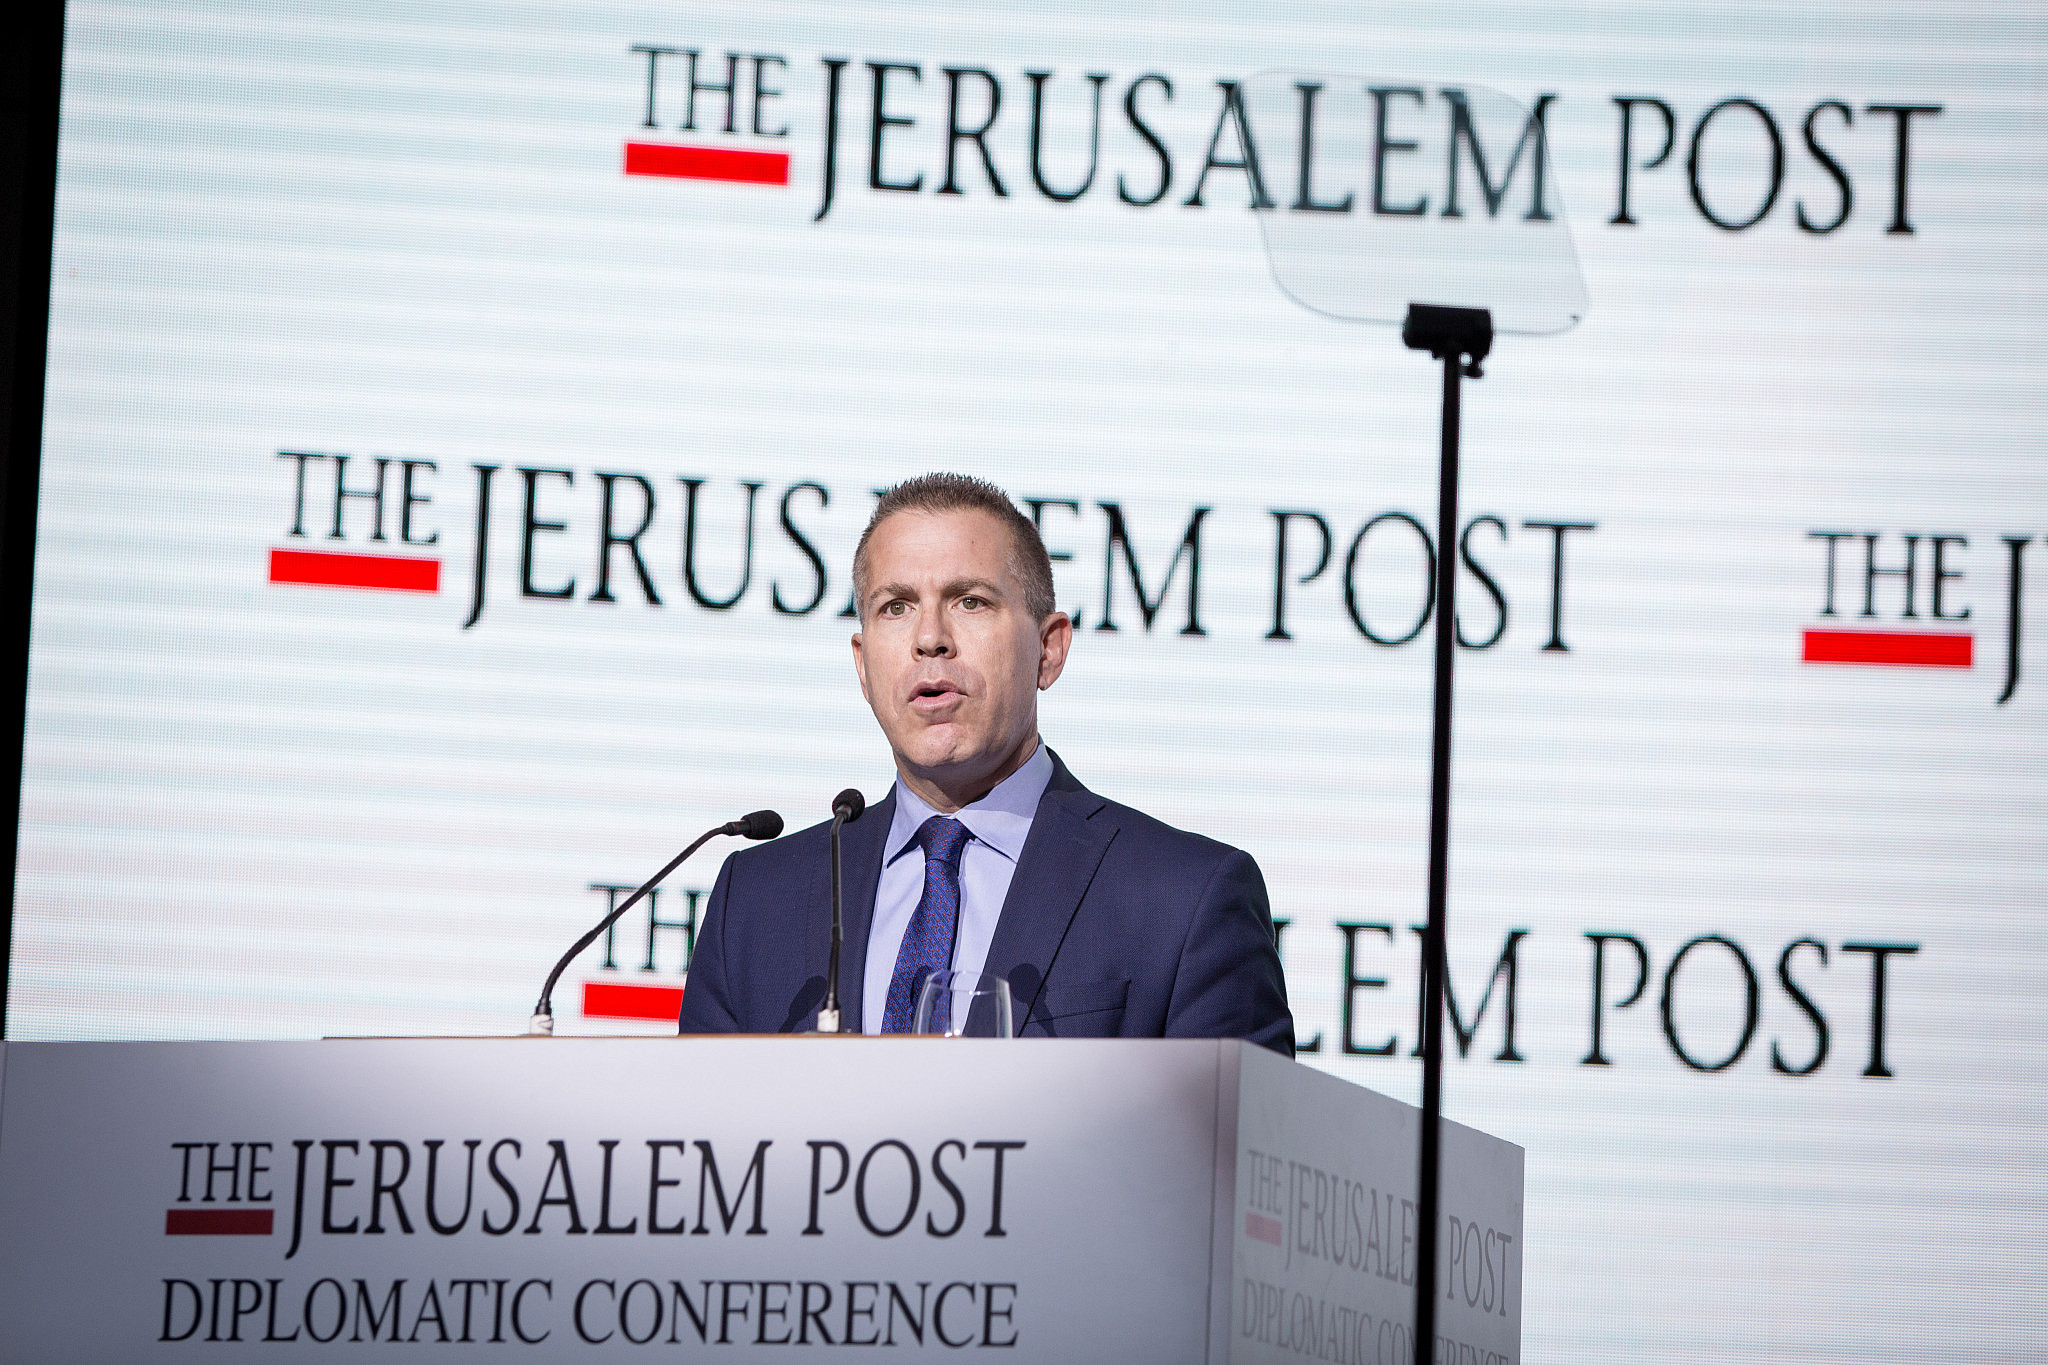 Journalism Excellence of the Jerusalem Post